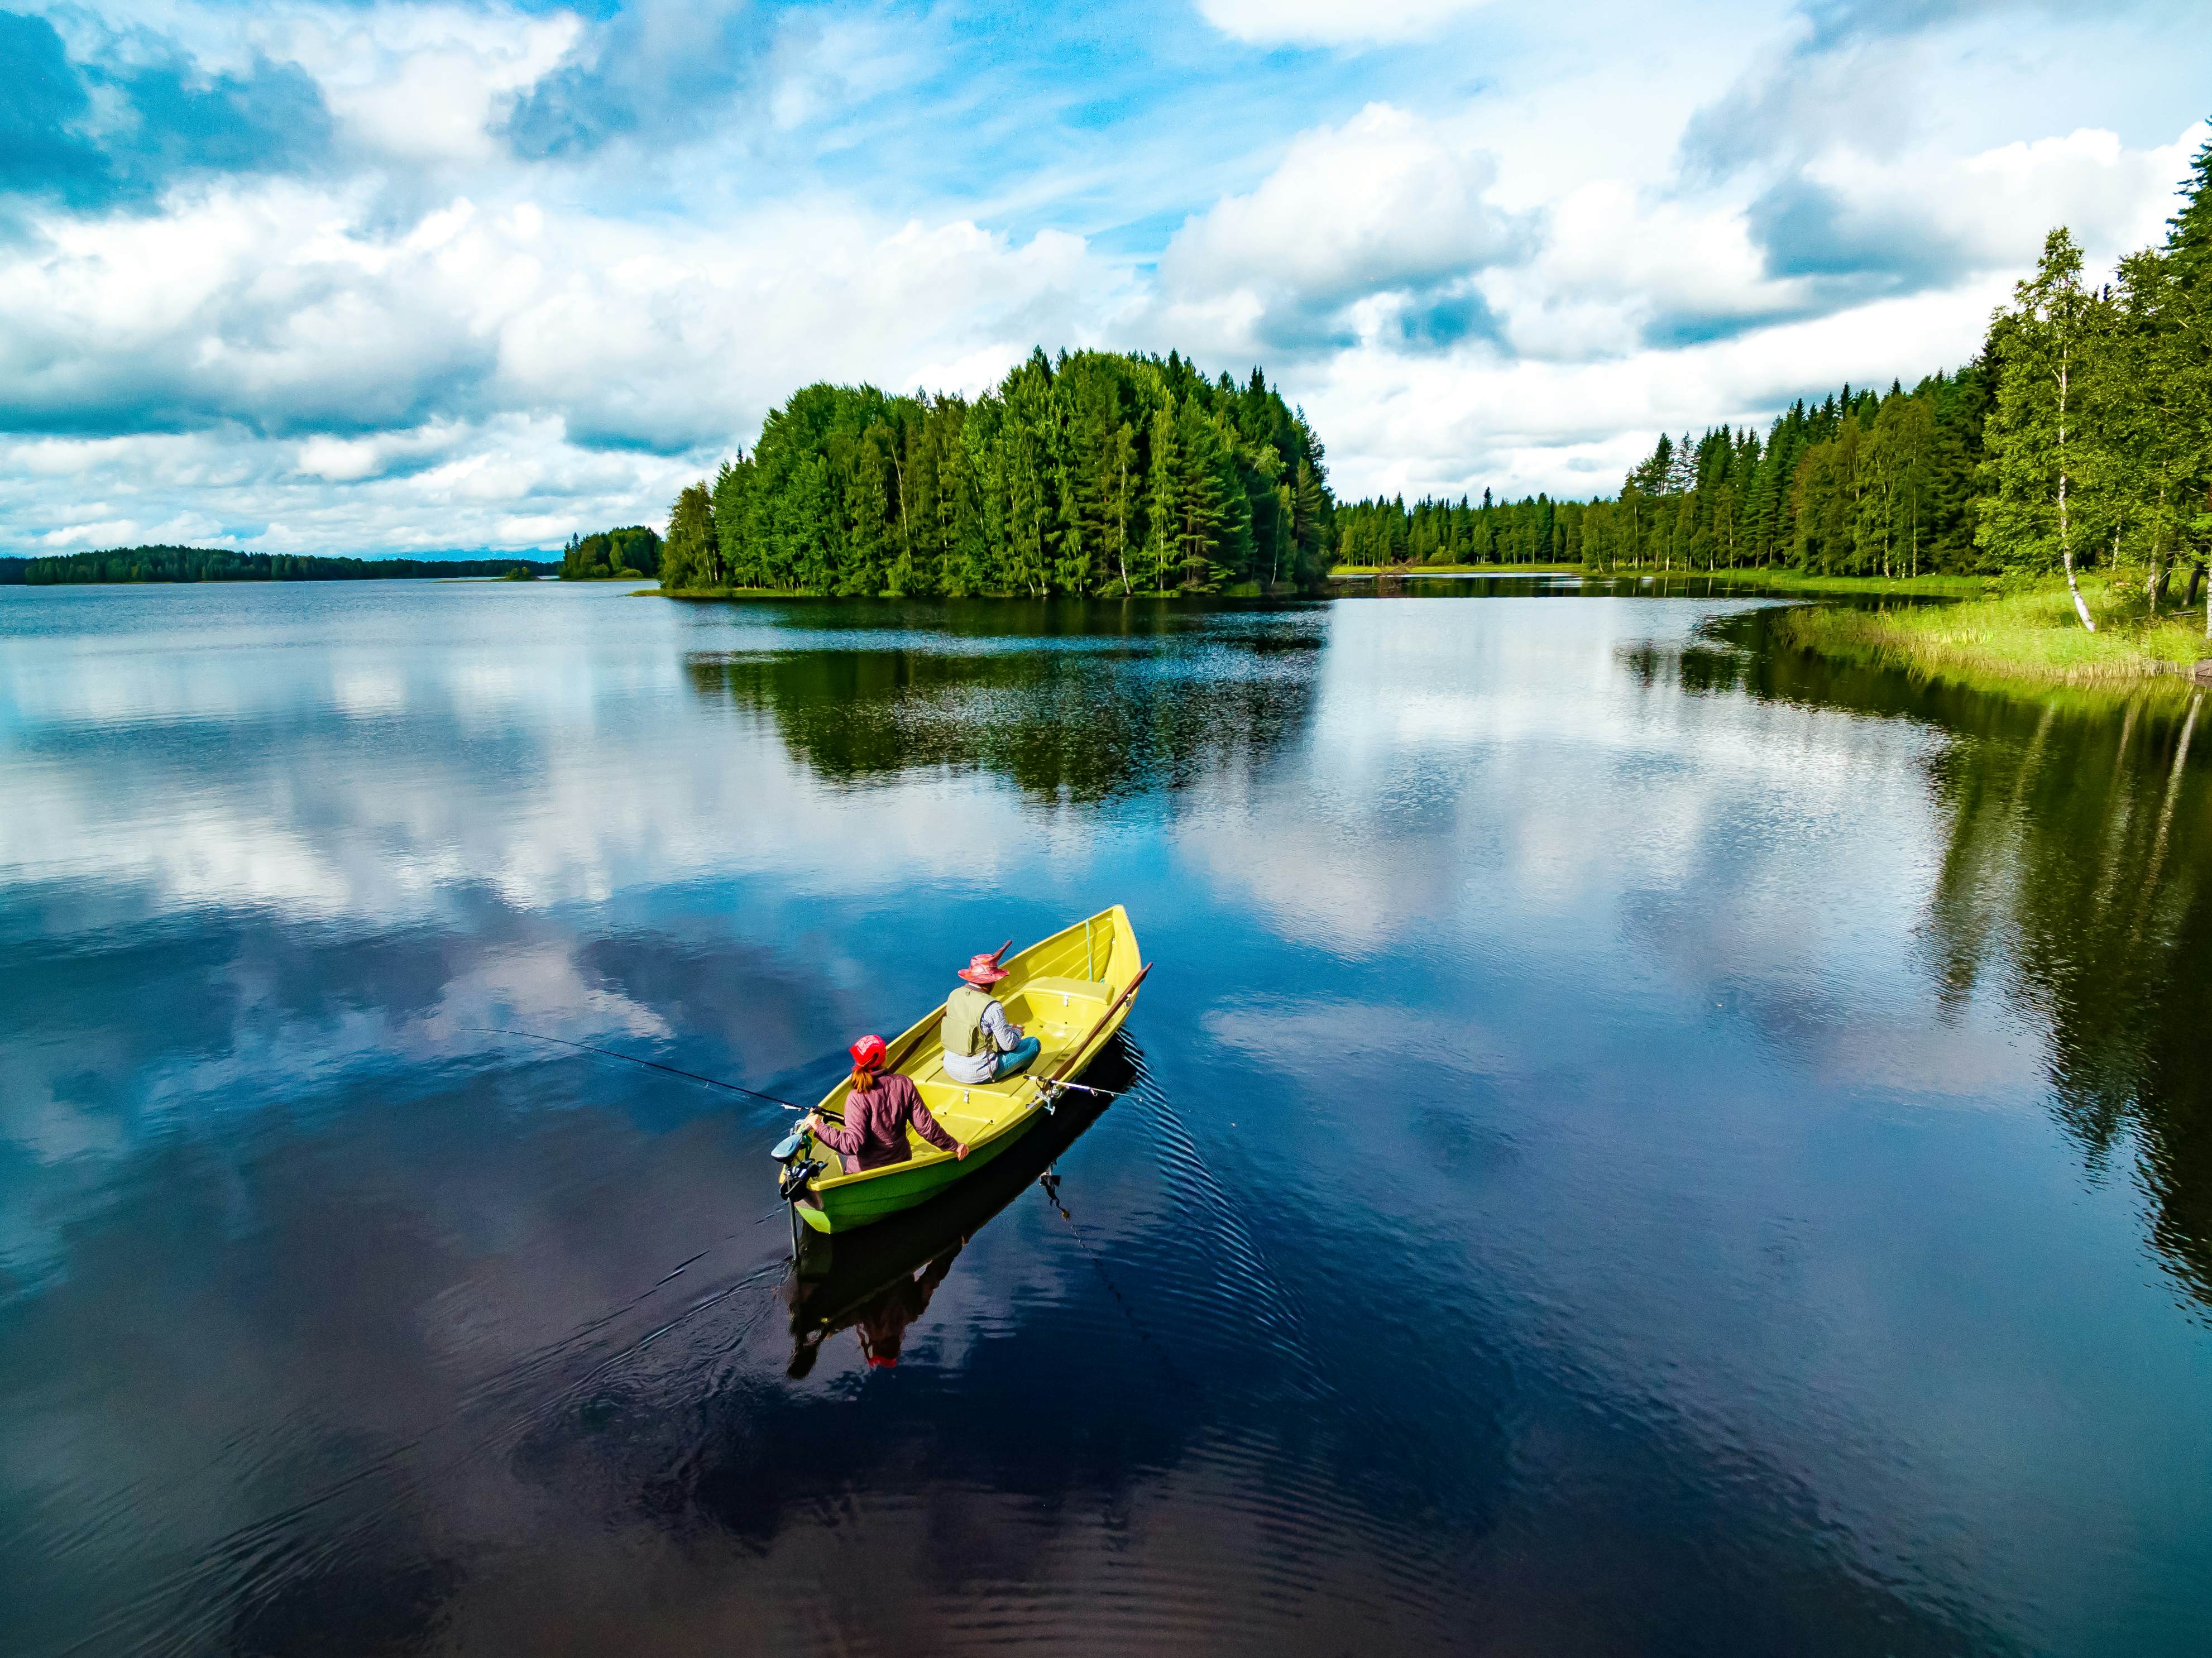 tourism activities and experiences unique to finland